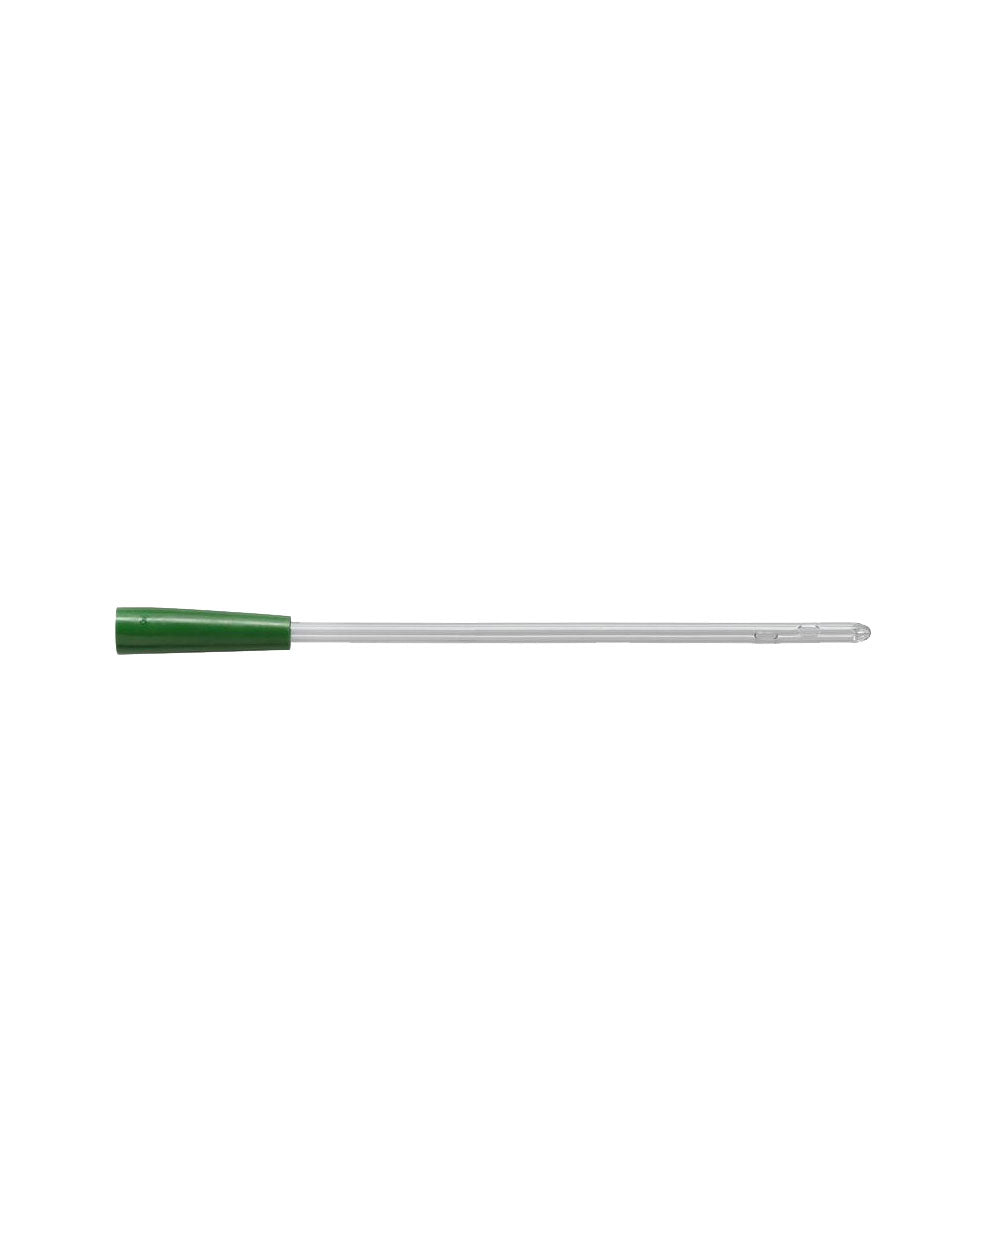 Coloplast Self-Cath Urethral Catheter Male Coude Olive with Guide Stripe 816  16FR 16" (40cm) - 30 Per Box